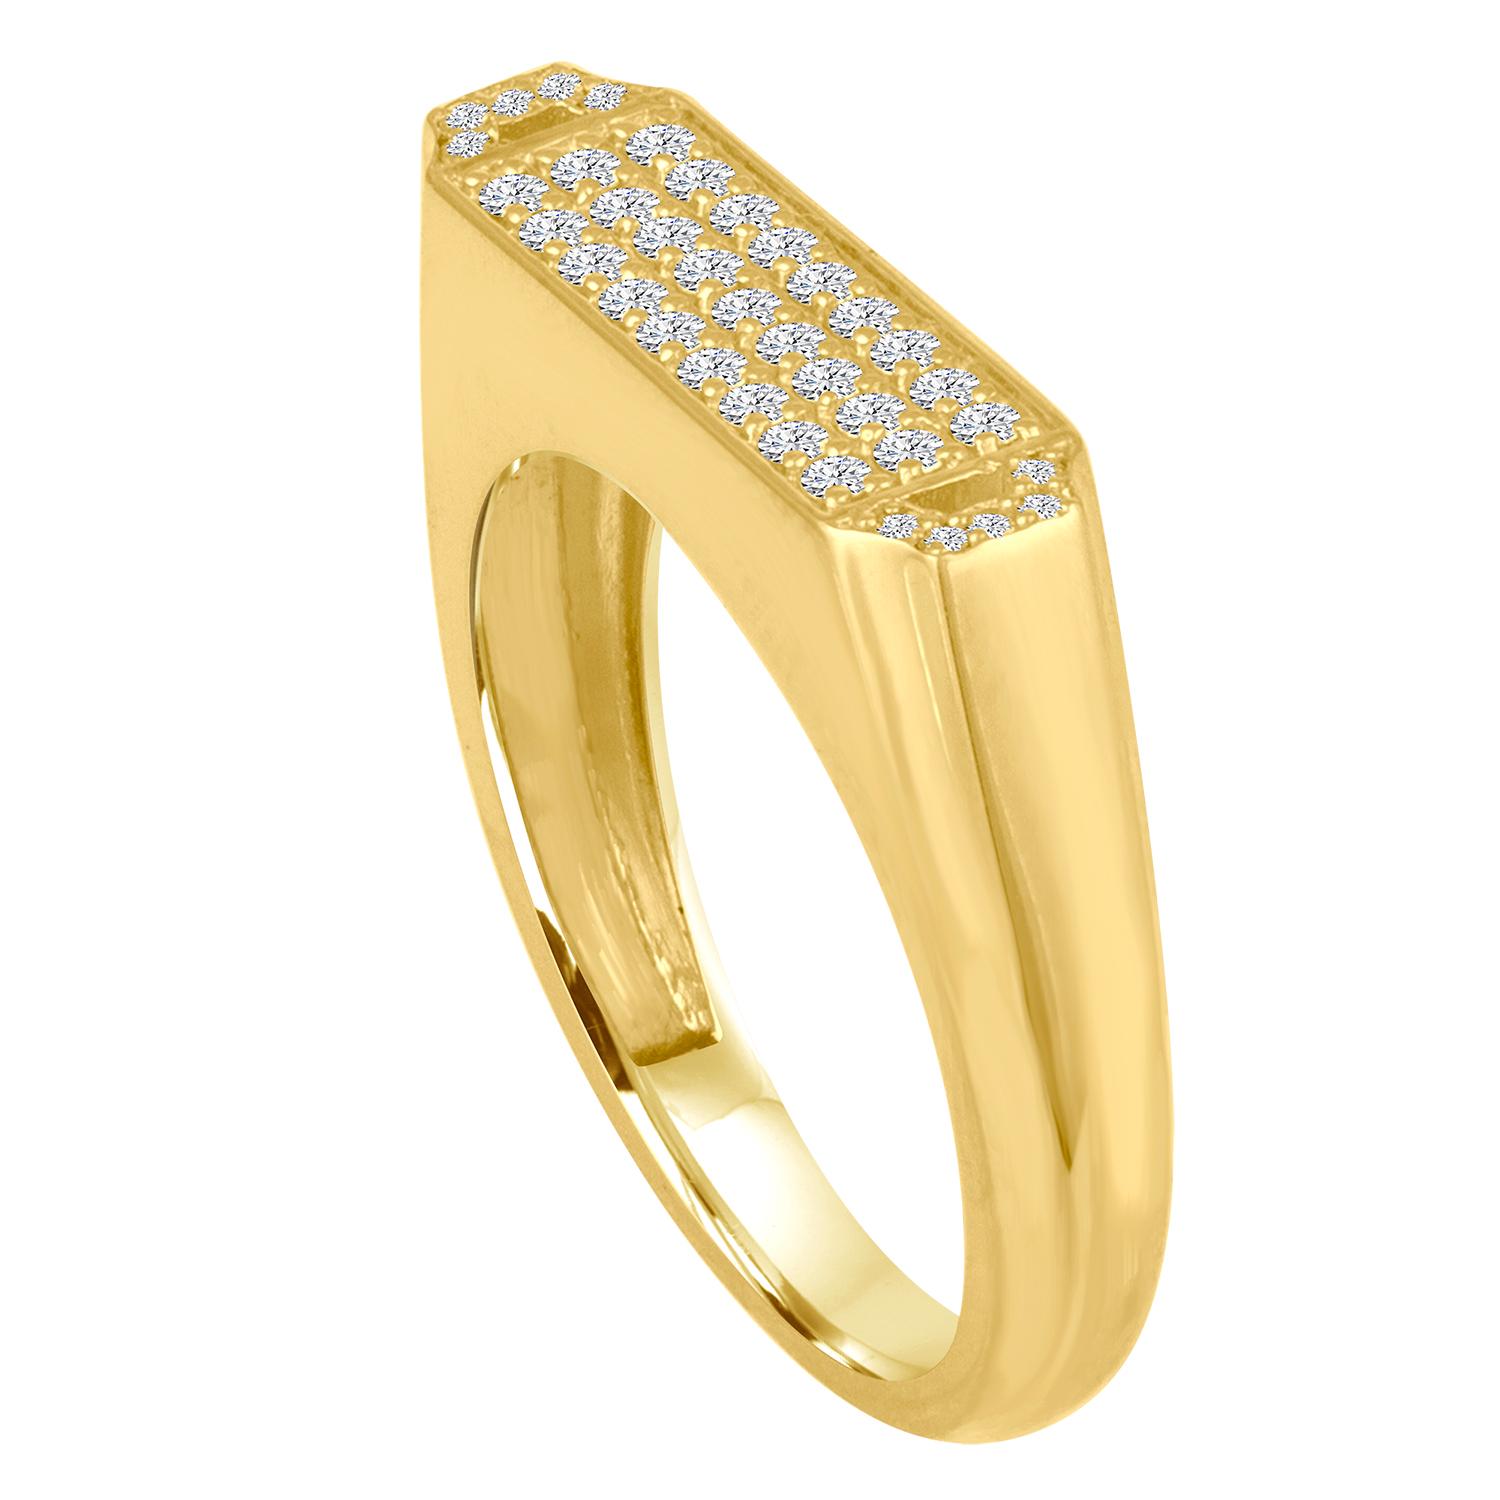 A modern and sleek 18 Karat Gold and Diamond Signet Ring which can be worn alone or stacked in pairs.  An Art Deco  influence is can be seen in this elongated shape.
Materials: 18 karat gold, .09mm, 1.3mm diamonds (0.30ct)
20mm x 5mm